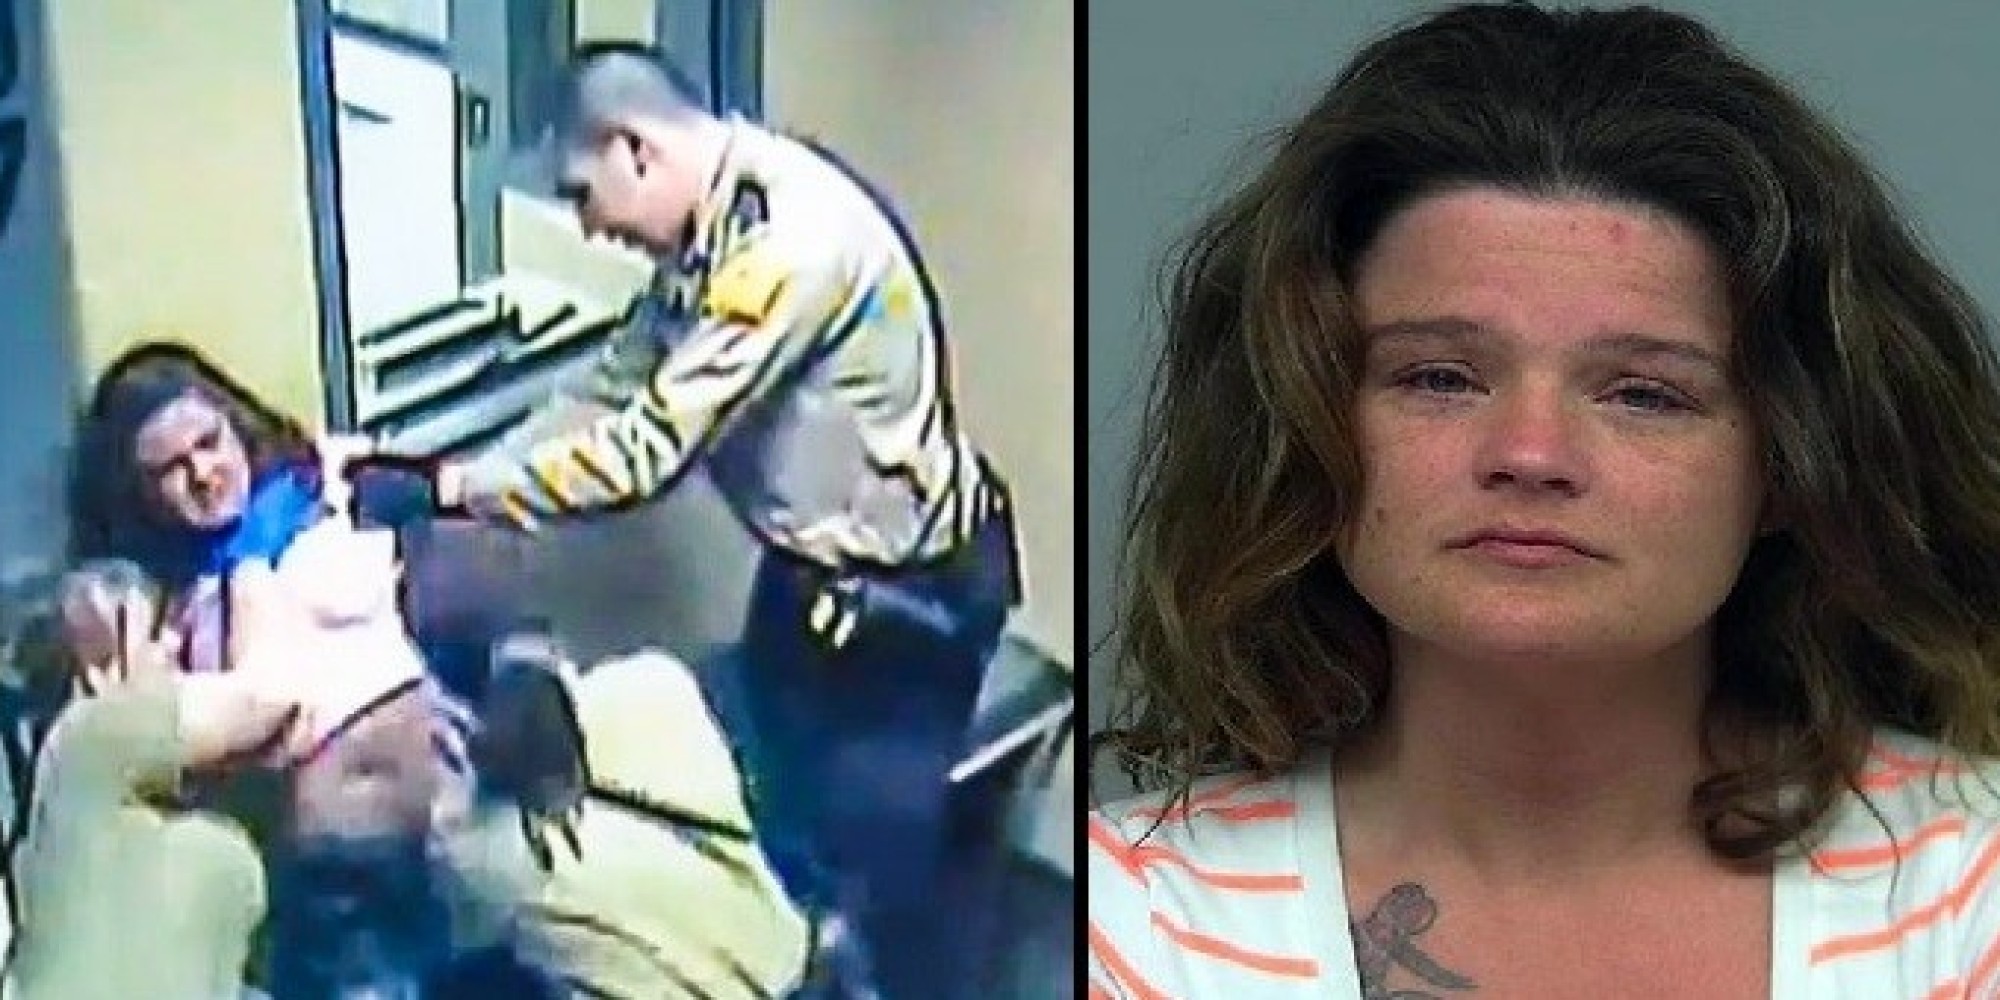 Prisoner punches guard as she tries to remove laptop 